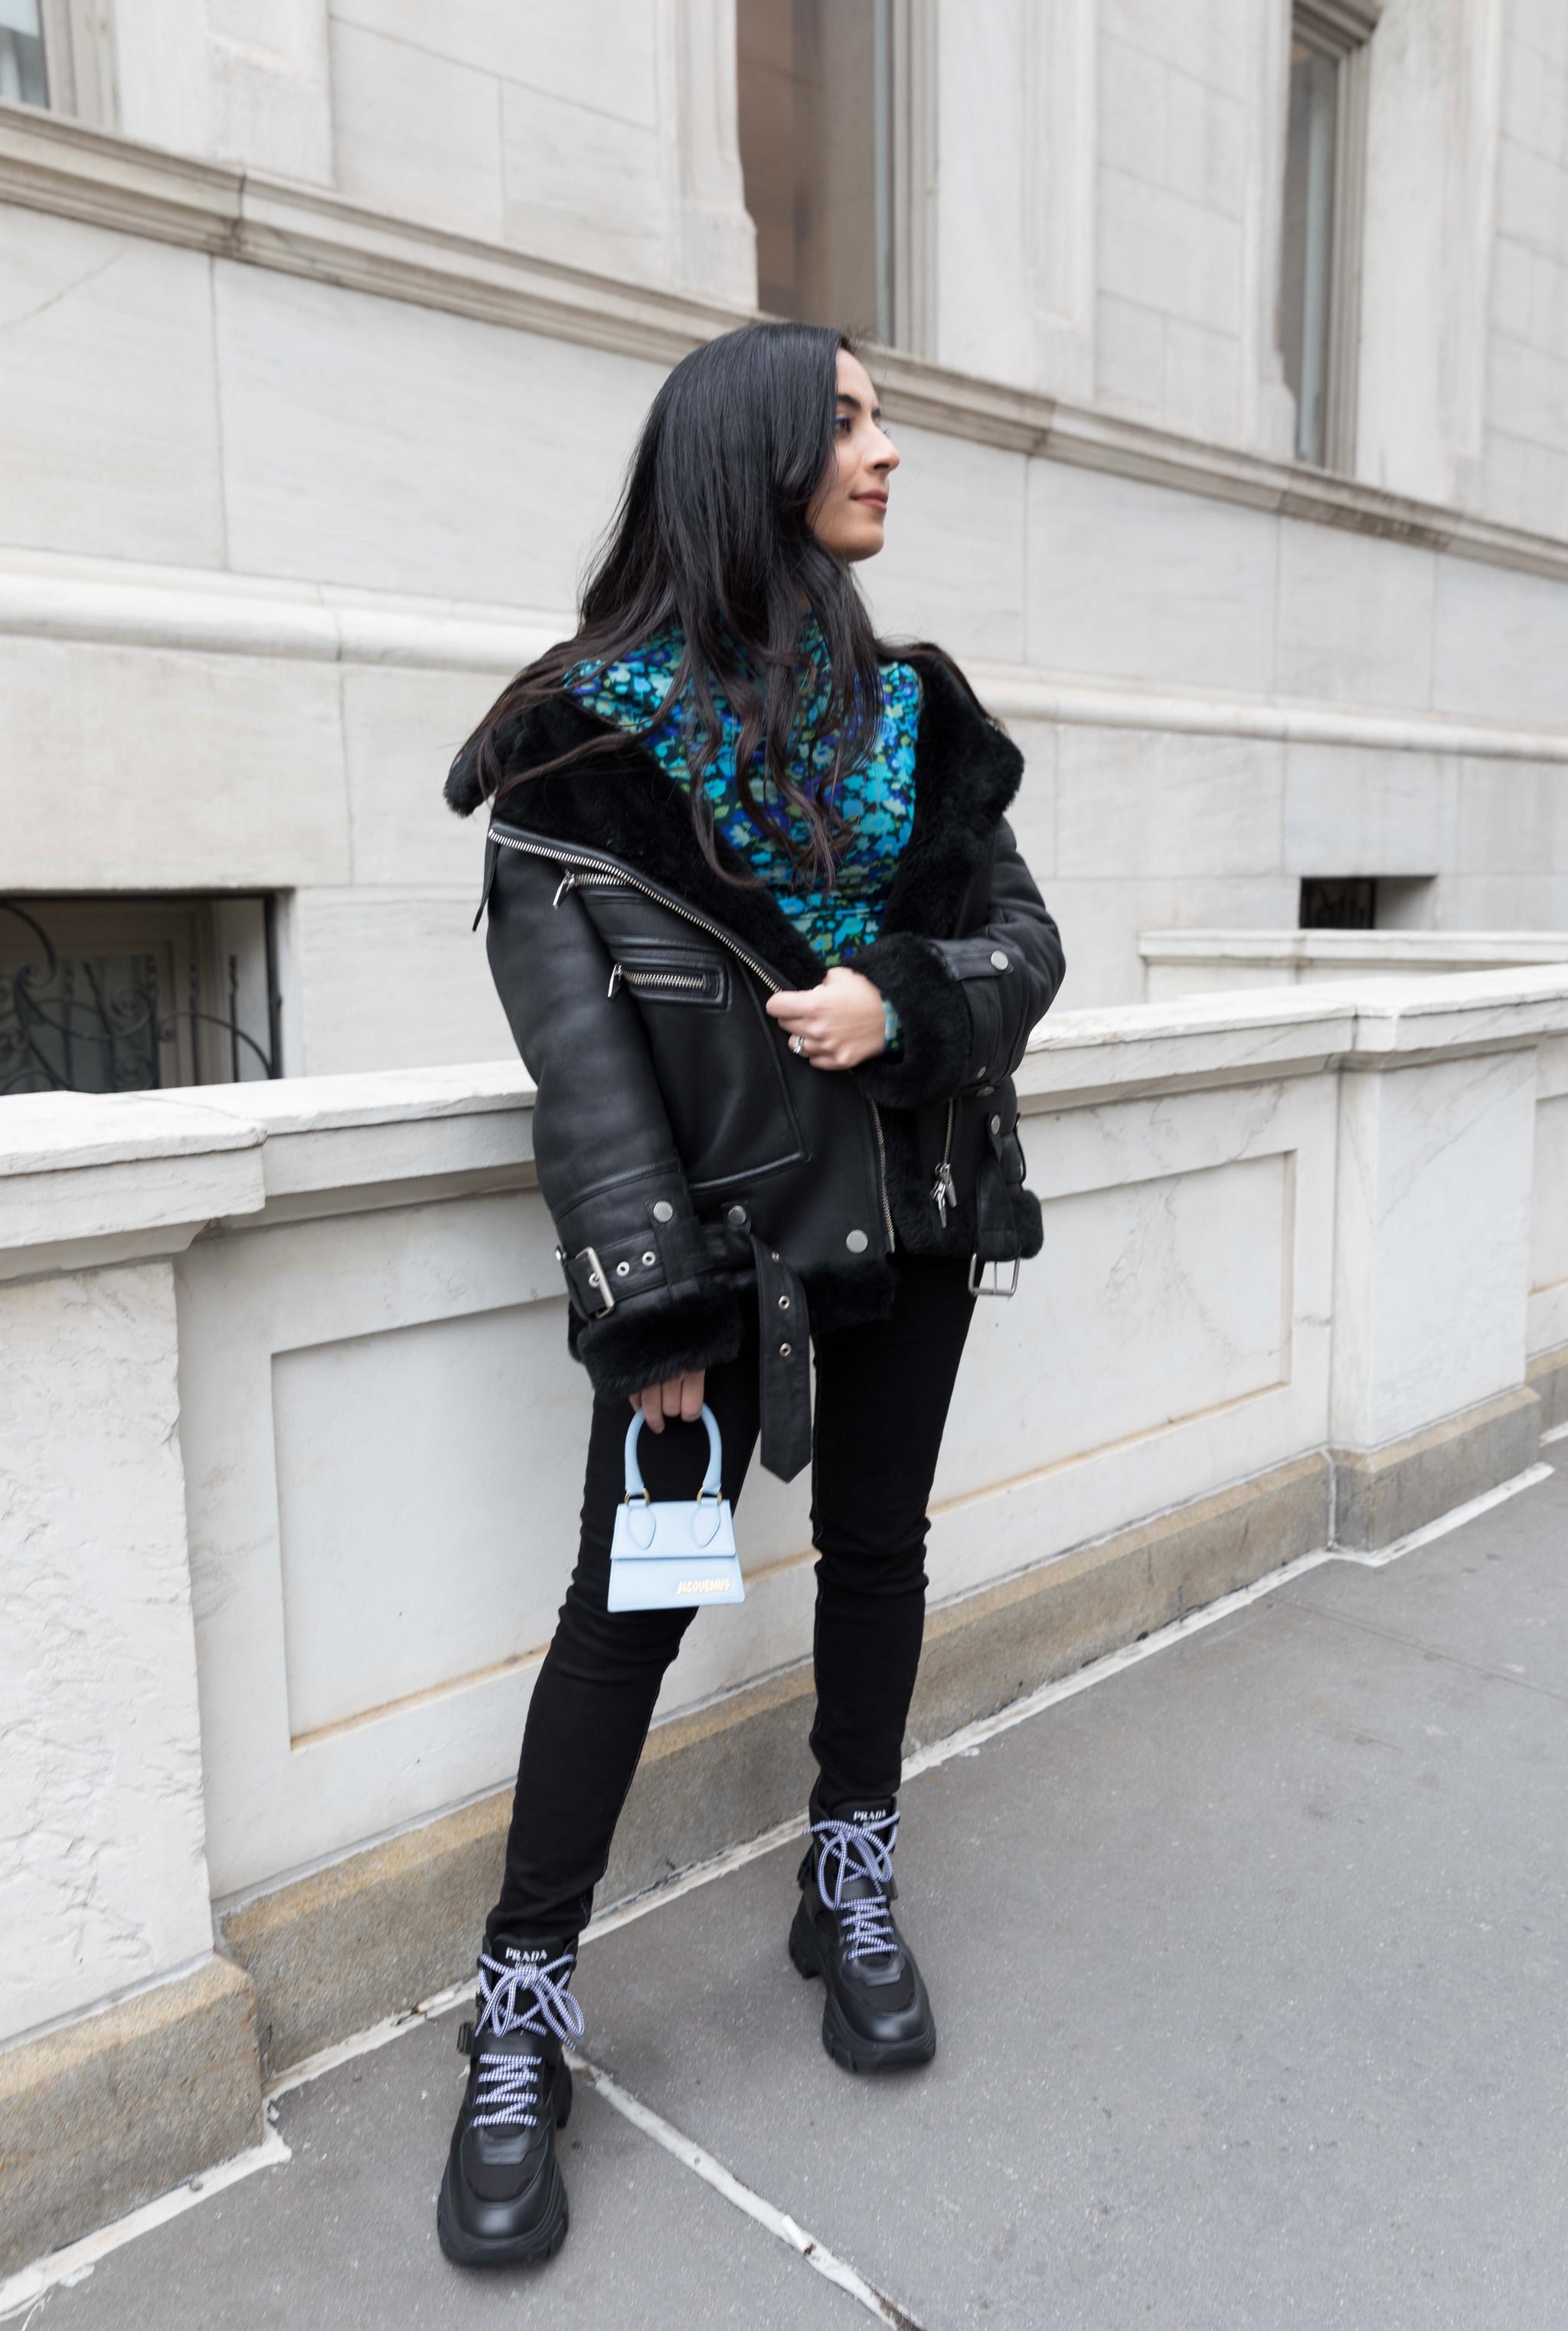 The Mini Bag Trend, Explained  Street style bags, Mini bag, Mini bag  street style